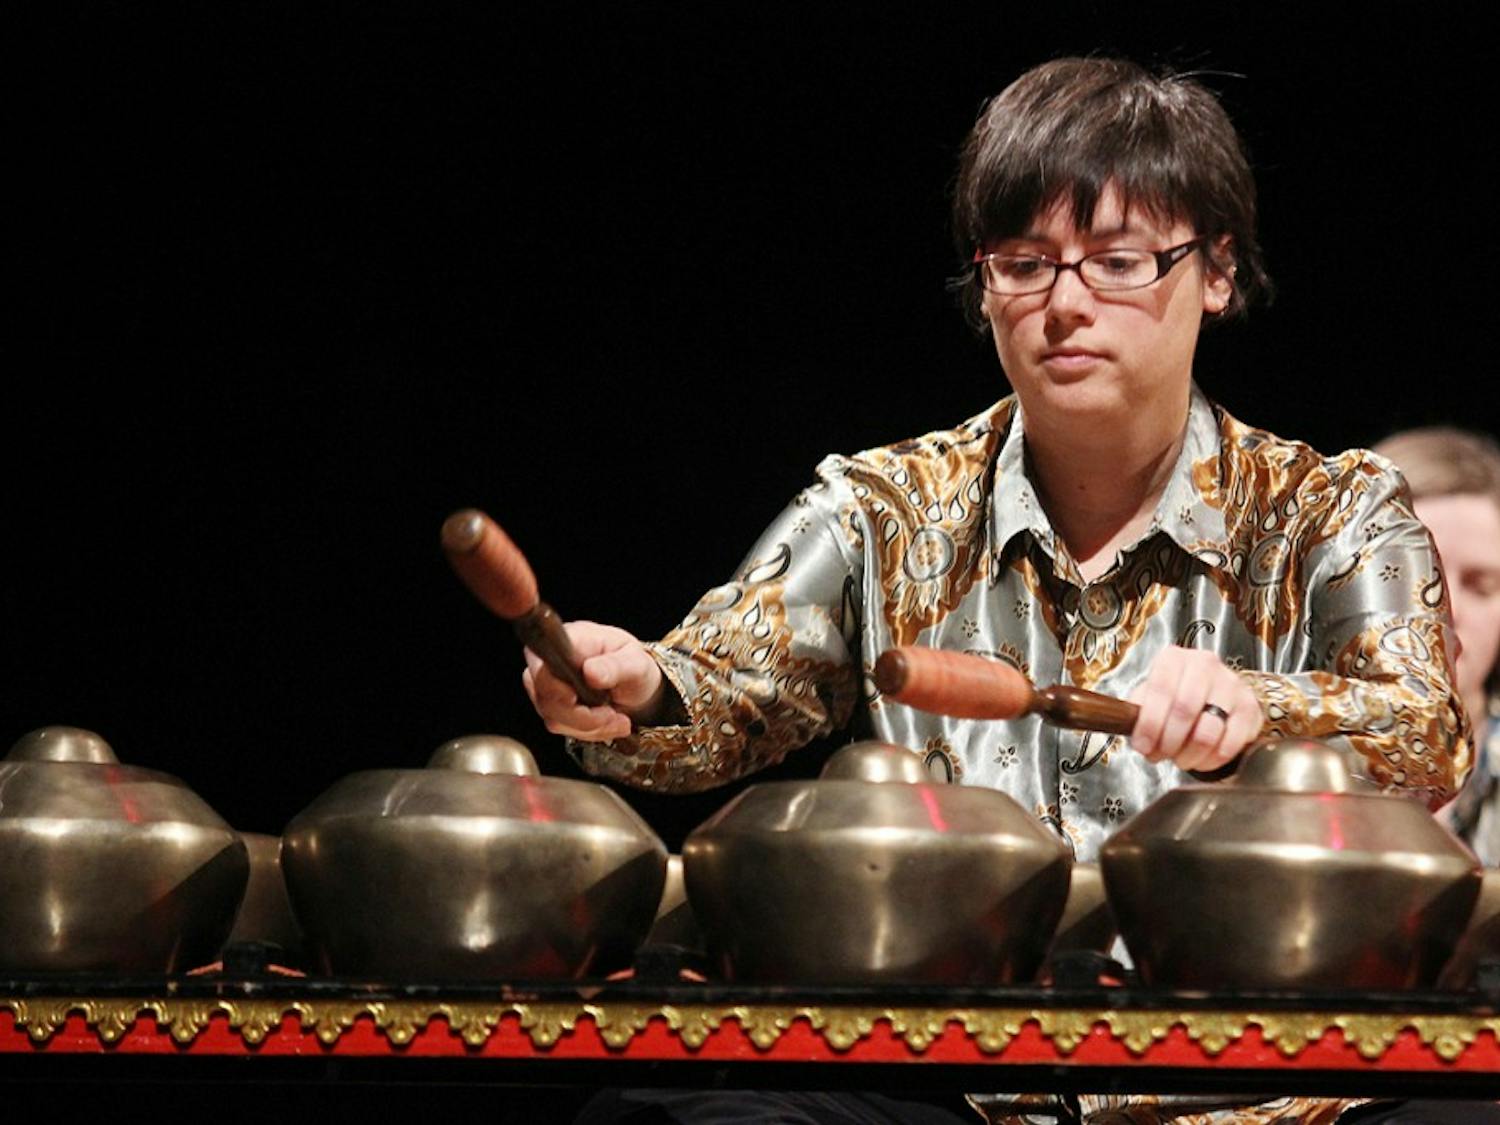 TEDxUNC - Saturday, Feb. 10 in Memorial HallGamelan Nyai Saraswati is a central Javanese musical ensemble based at the University of North Carolina, Chapel Hill. The gamelan arrived in Chapel Hill from Java in December of 2000, wrapped in newspapers, clove cigarette boxes, and plastic 